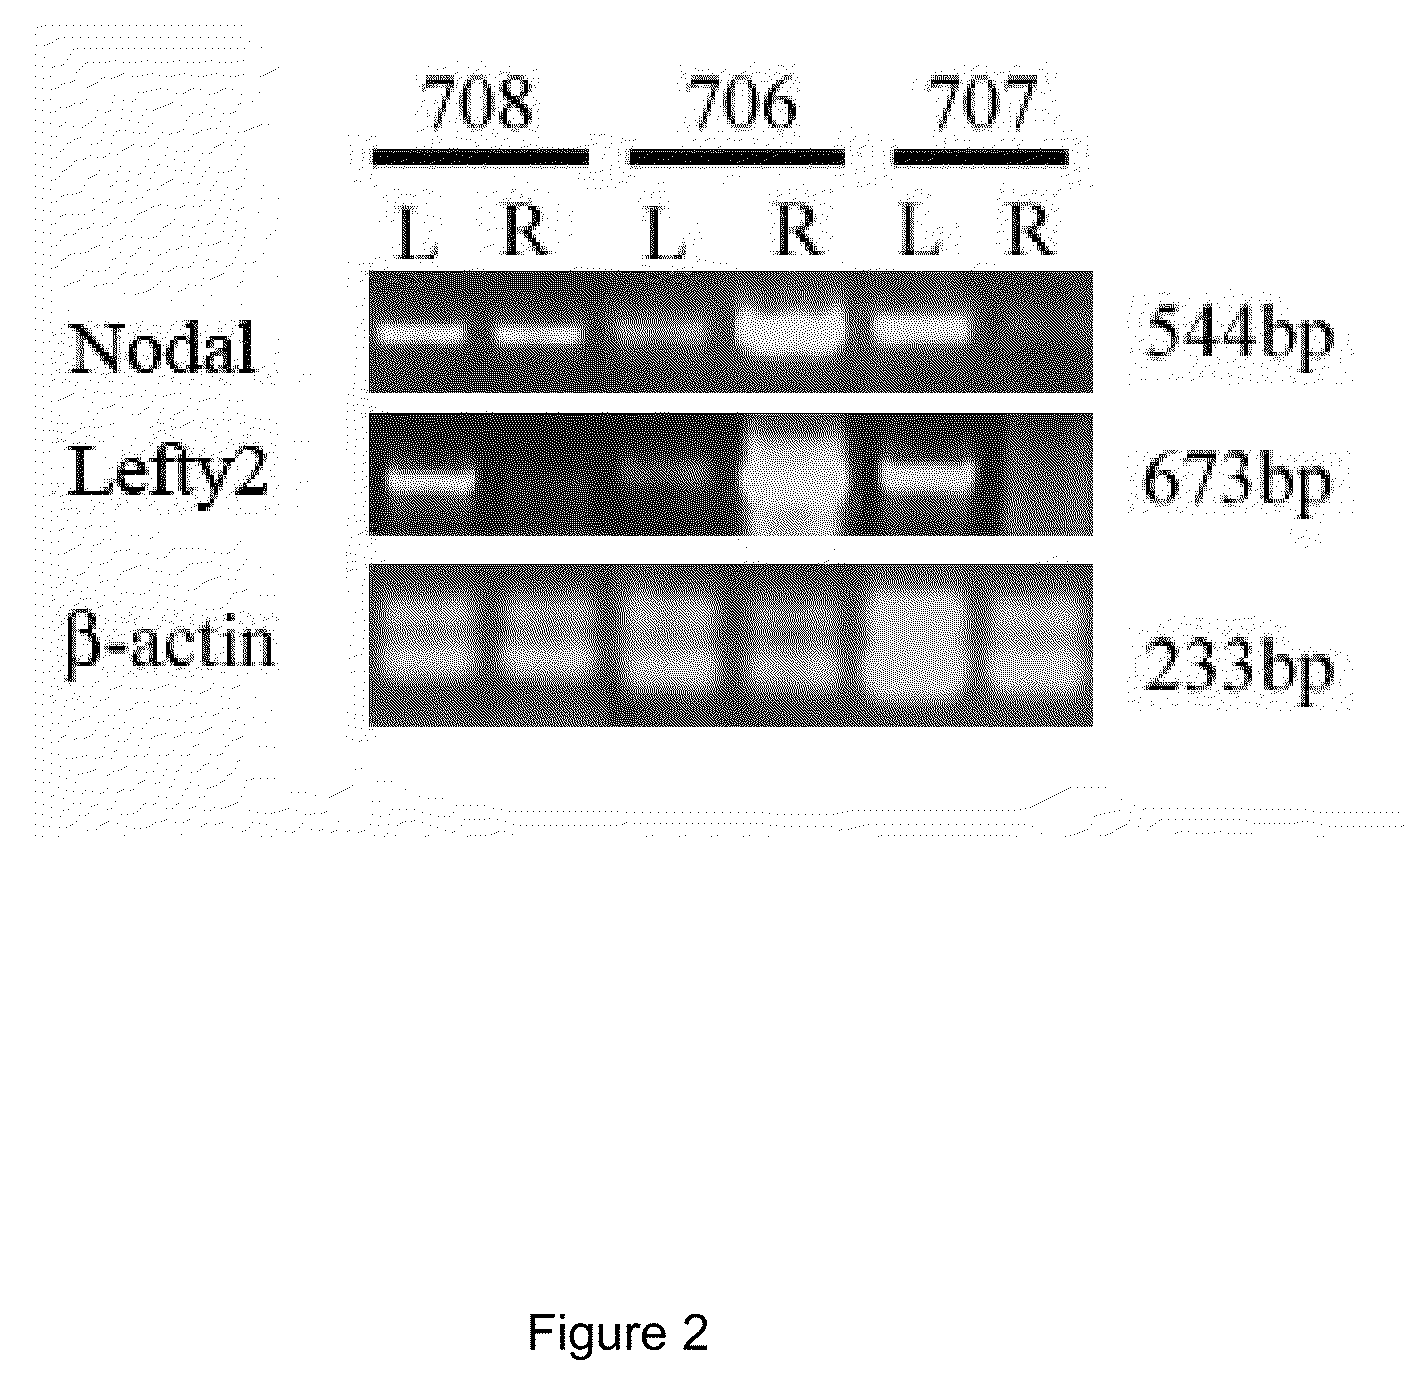 Methods of screening for compounds for use as modulators of left-right asymmetry in scoliotic subjects and for monitoring efficacy of an orthopaedic device